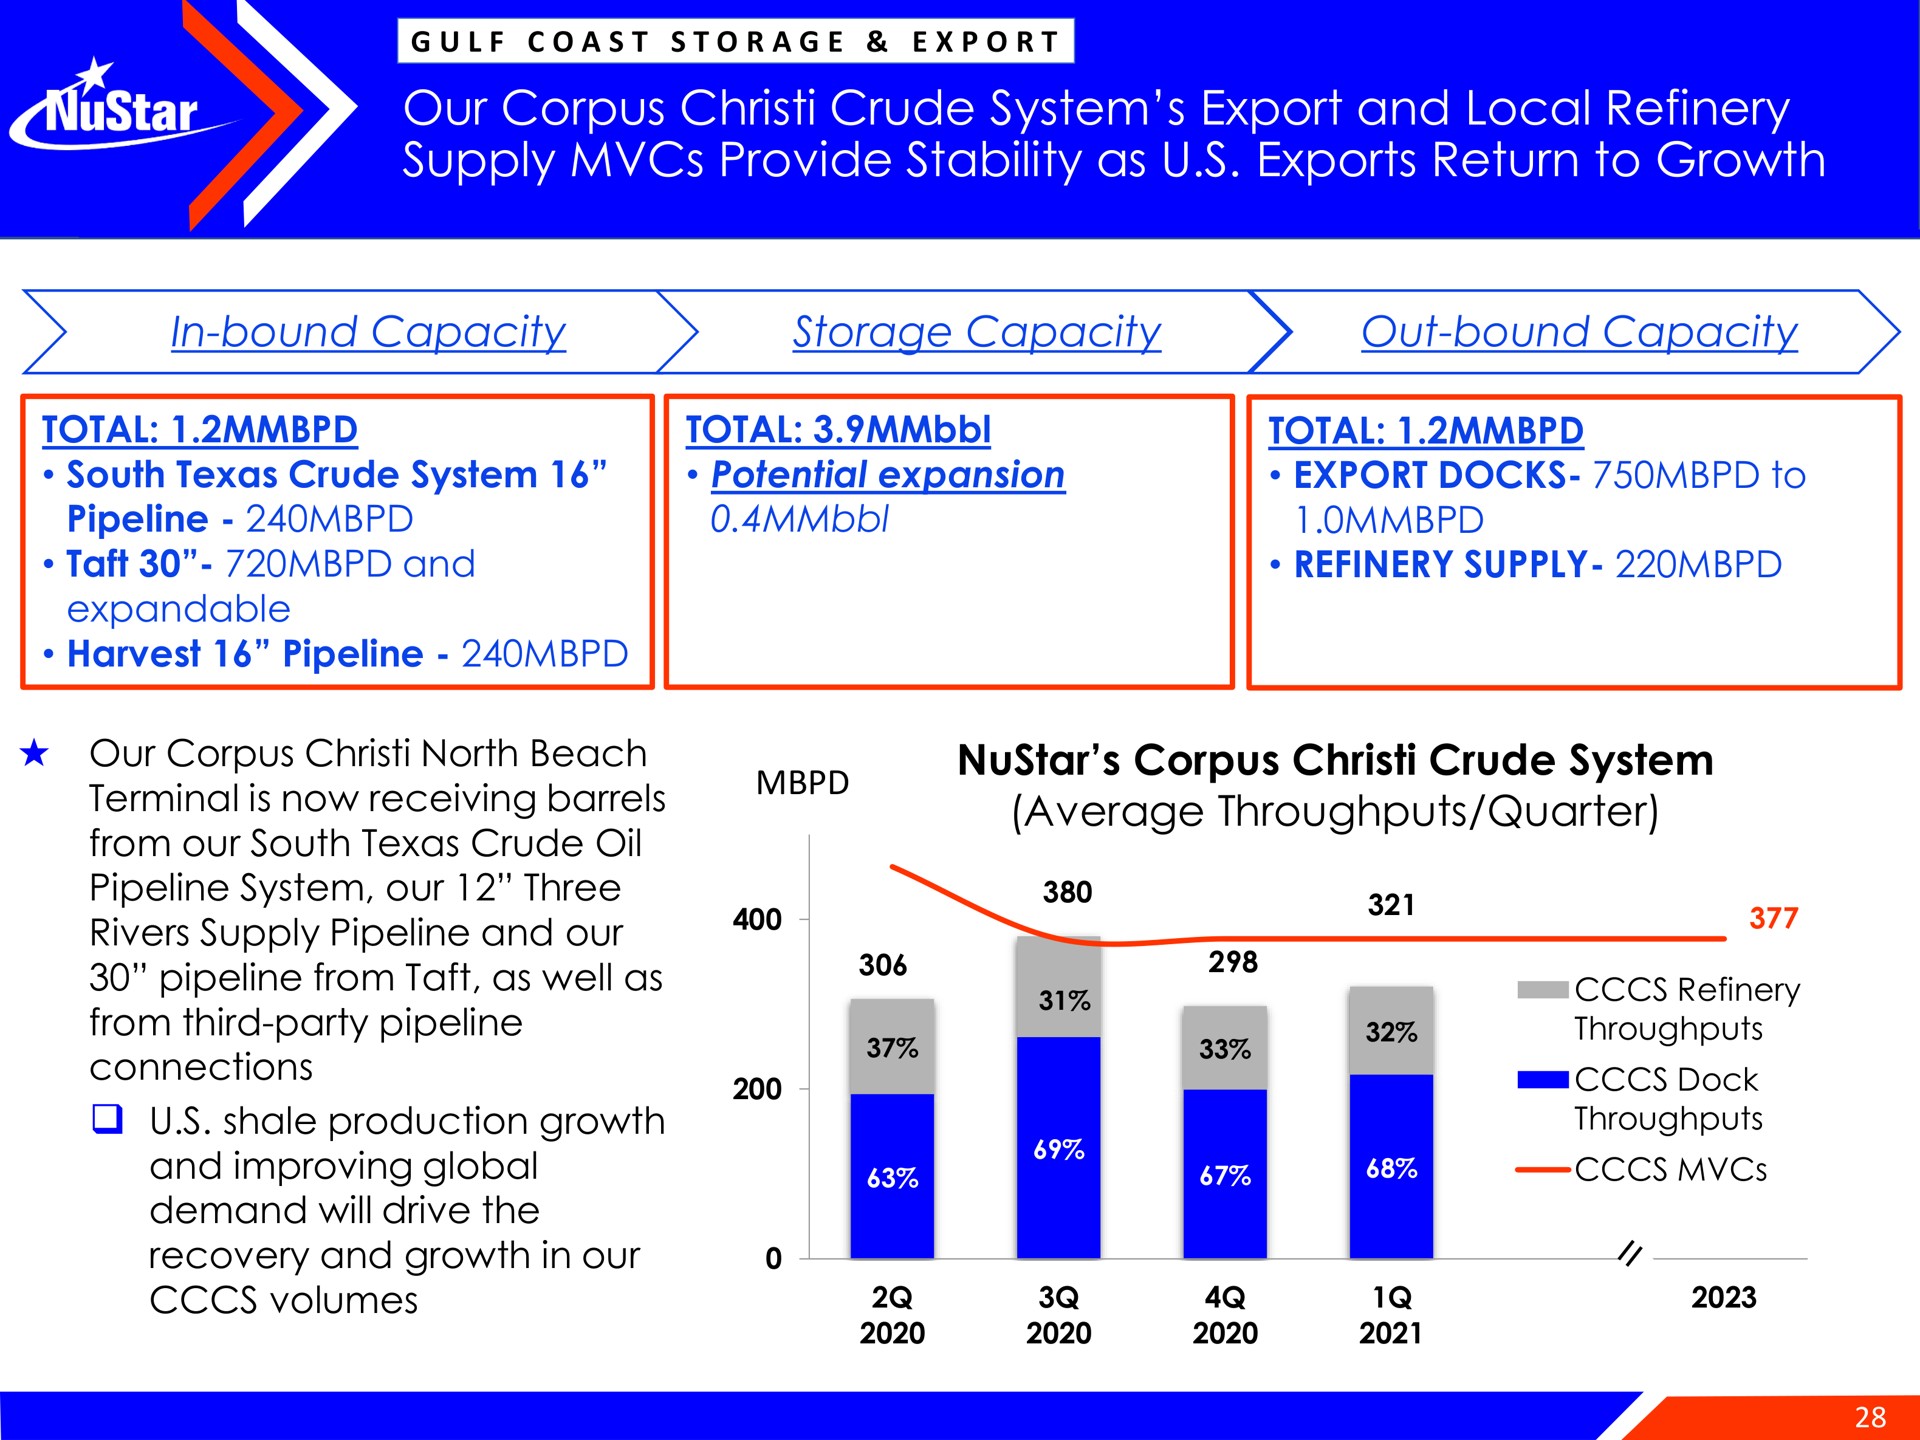 our corpus crude system export and local refinery supply provide stability as exports return to growth from out south oil average throughputs quarter | NuStar Energy